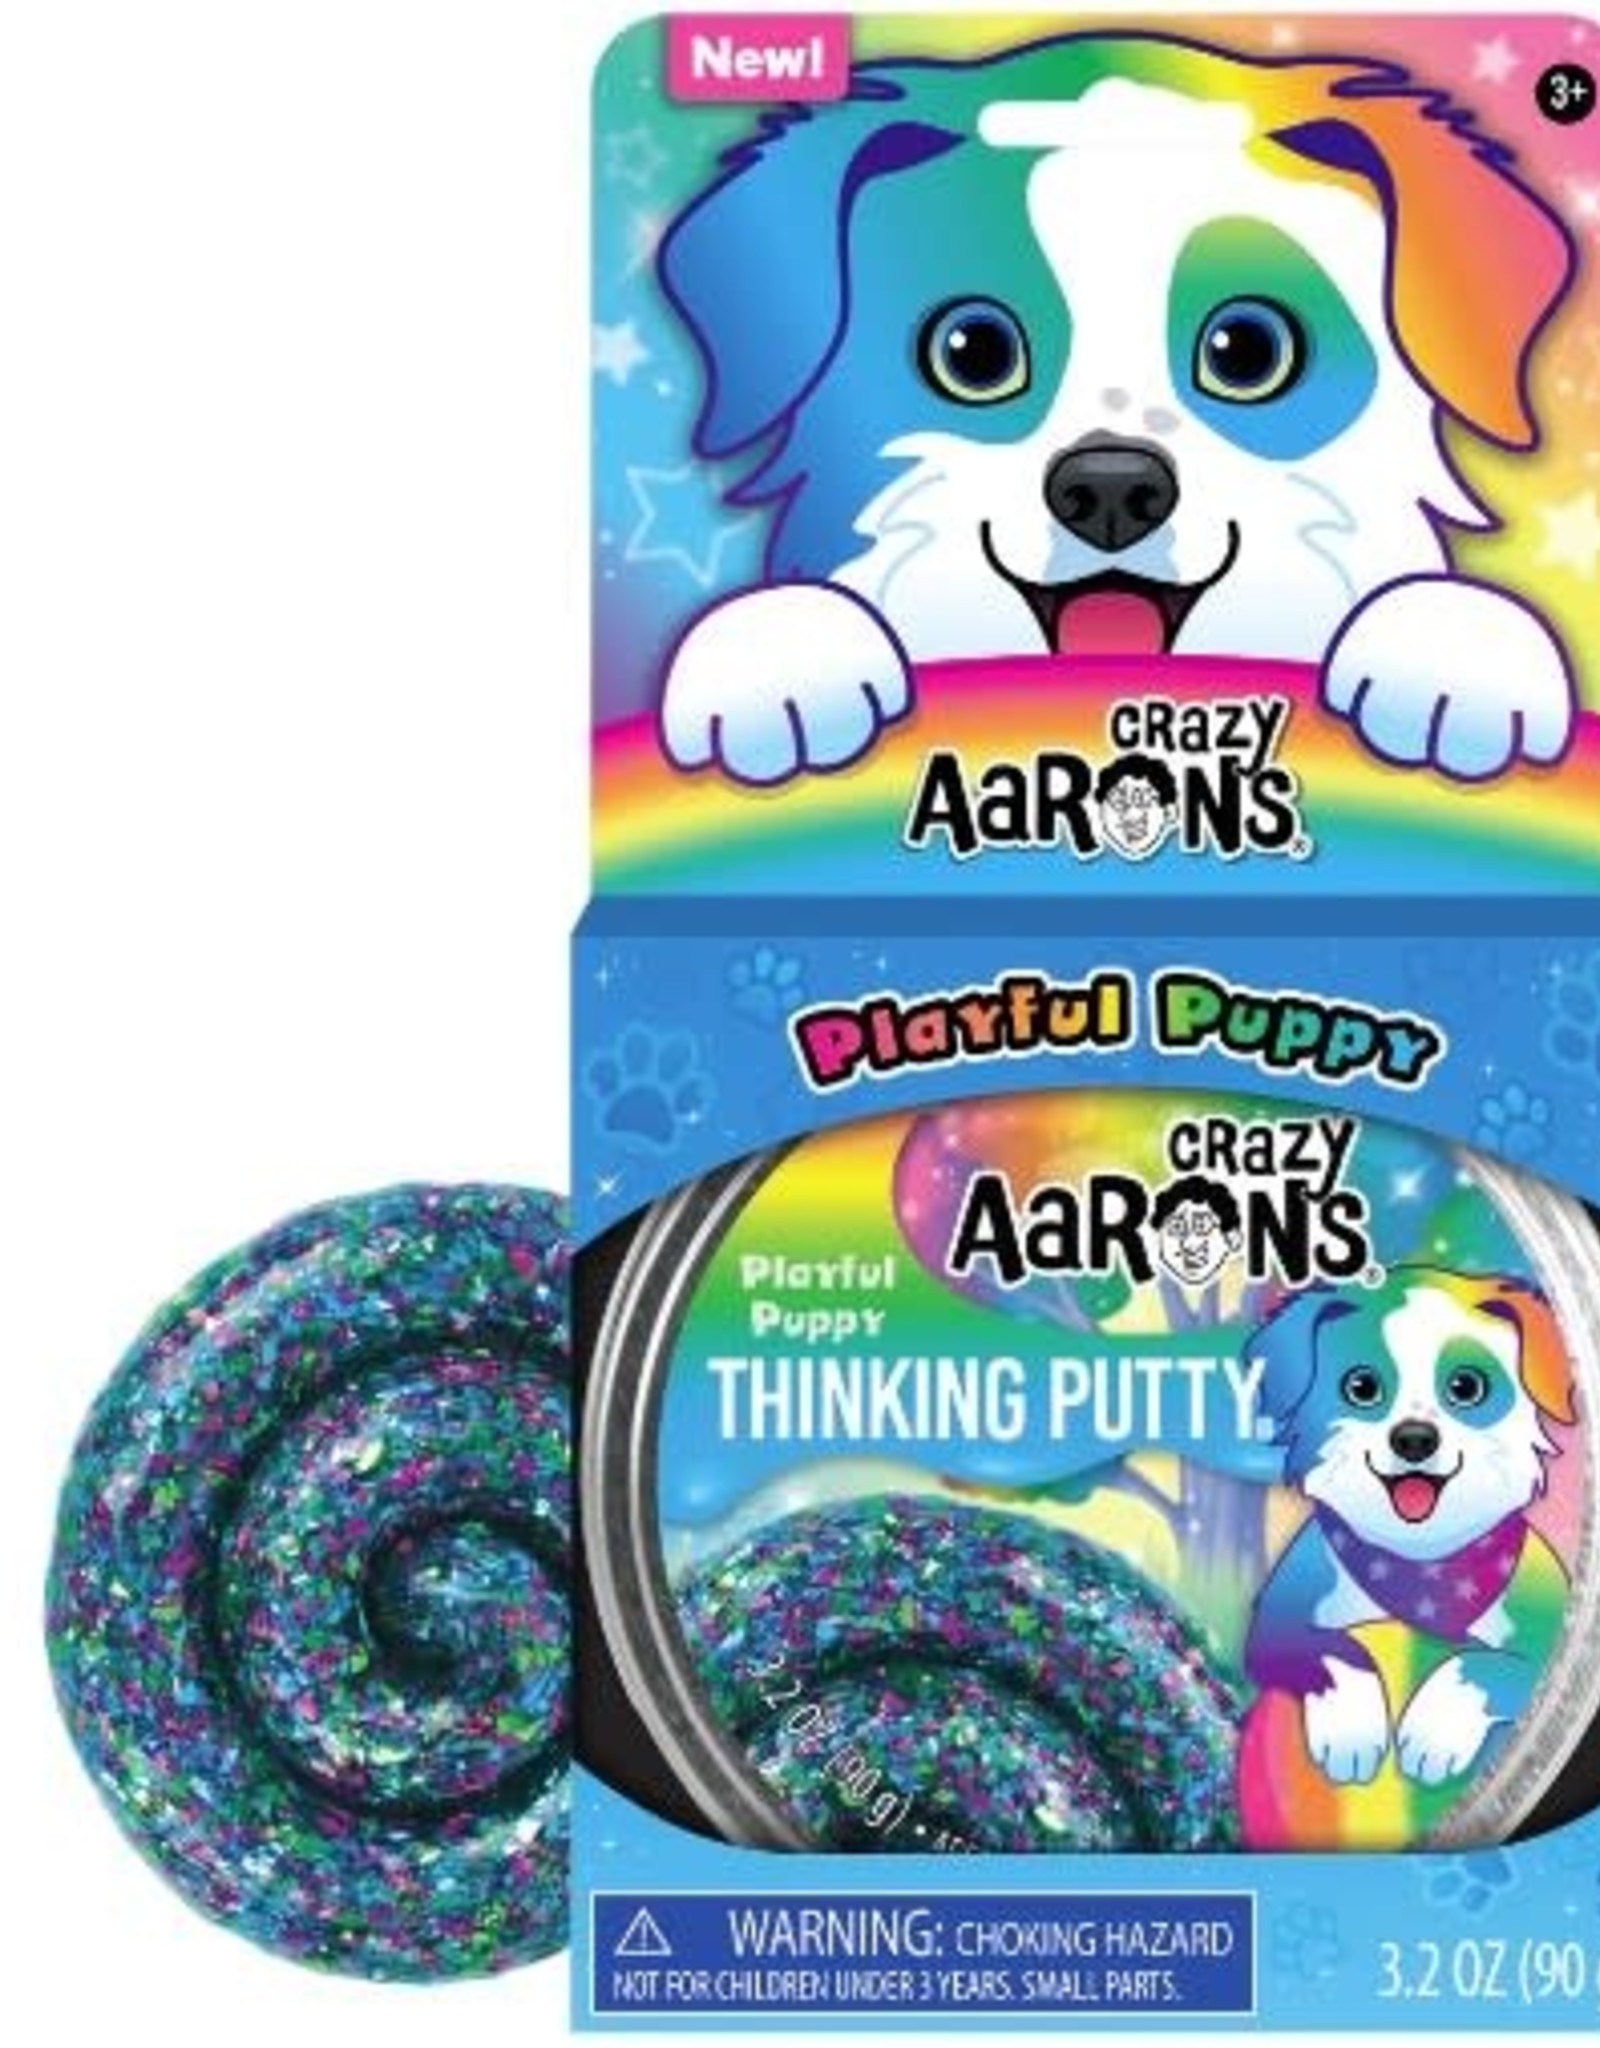 Crazy Aaron's Thinking Putty Crazy Aaron's 4" Tin - Playful Puppy